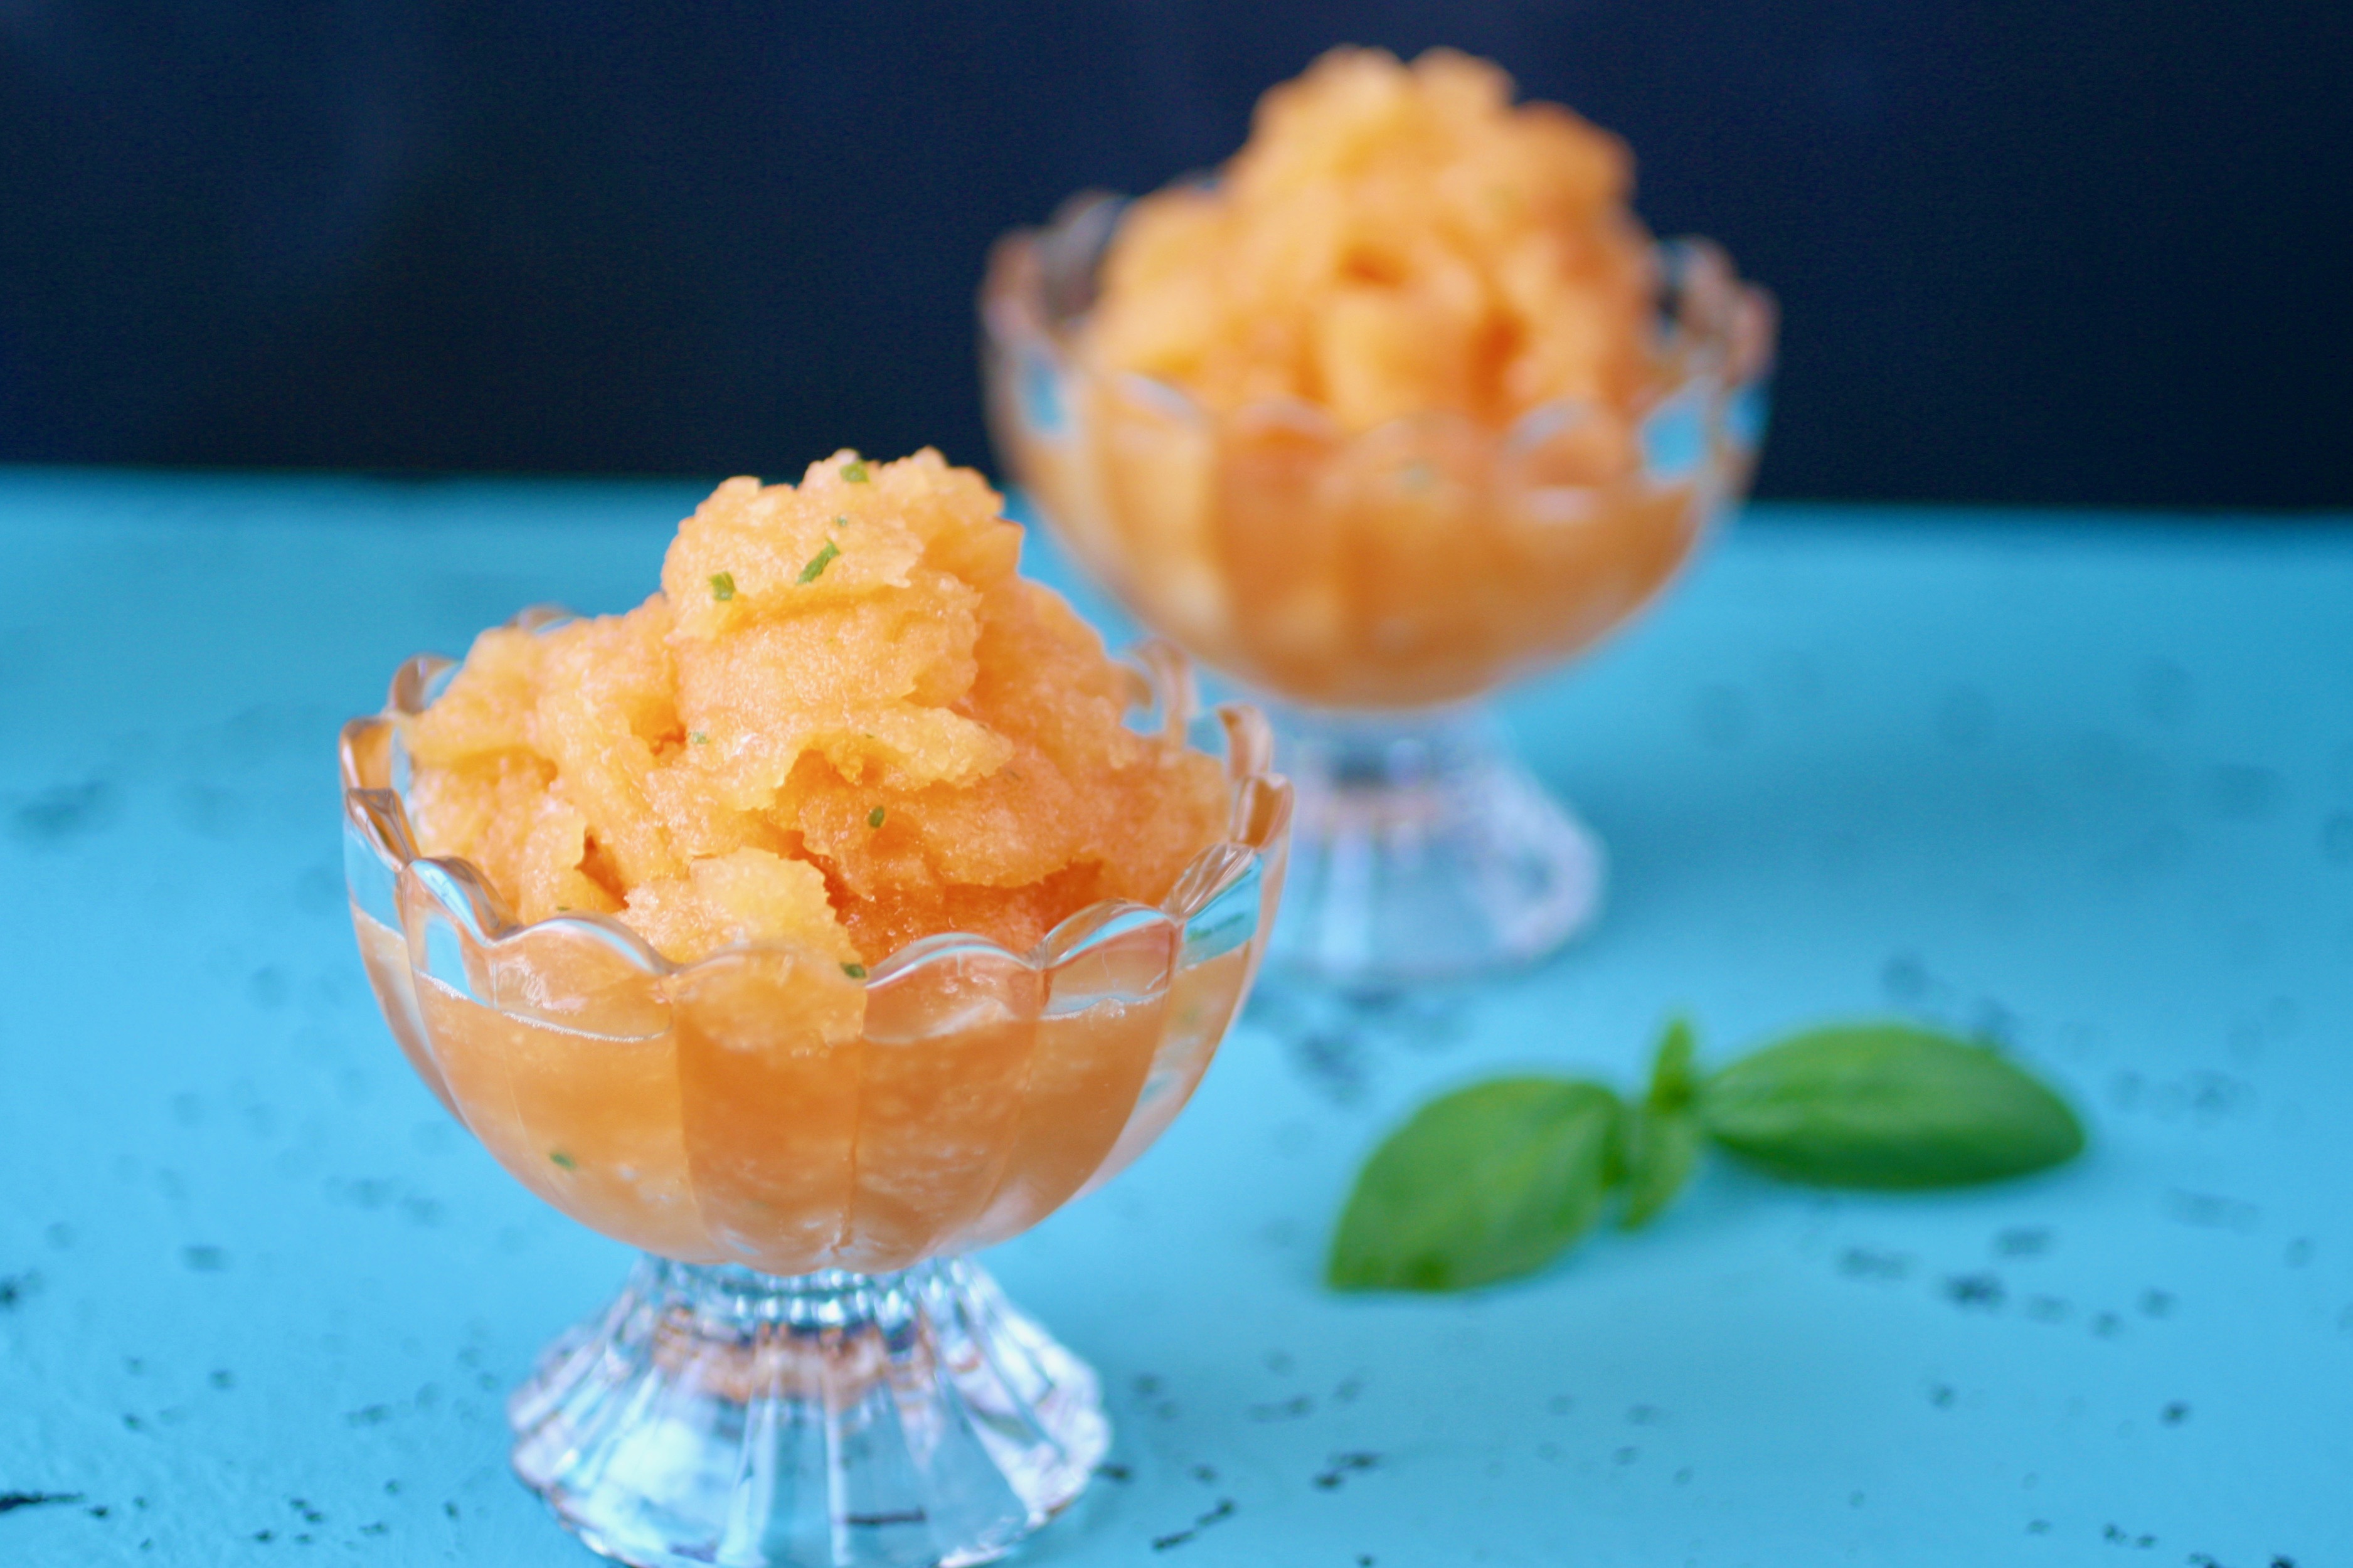 Cantaloupe-Basil Granita is the treat to reach for this summer. Cantaloupe-Basil Granita is easy to make and such a fun, frozen treat!